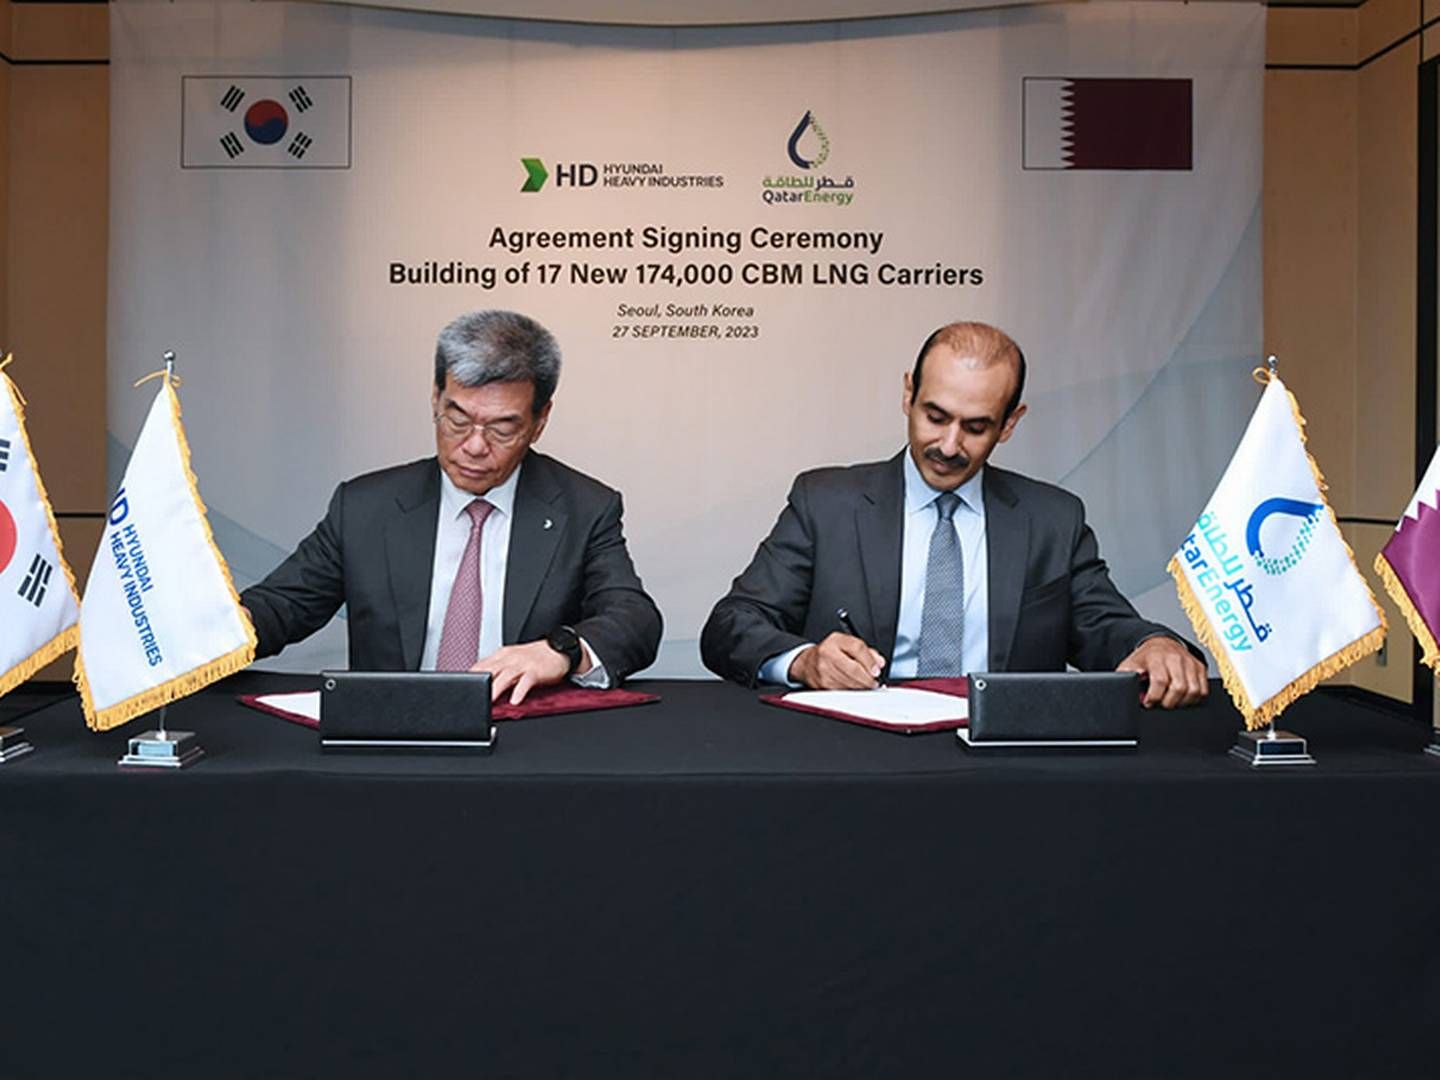 The management of South Korean shipbuilder Samsung Heavy Industries Co. signs a huge order for the delivery of LNG carriers to the Middle East on an earlier occasion. | Foto: Qatarenergy